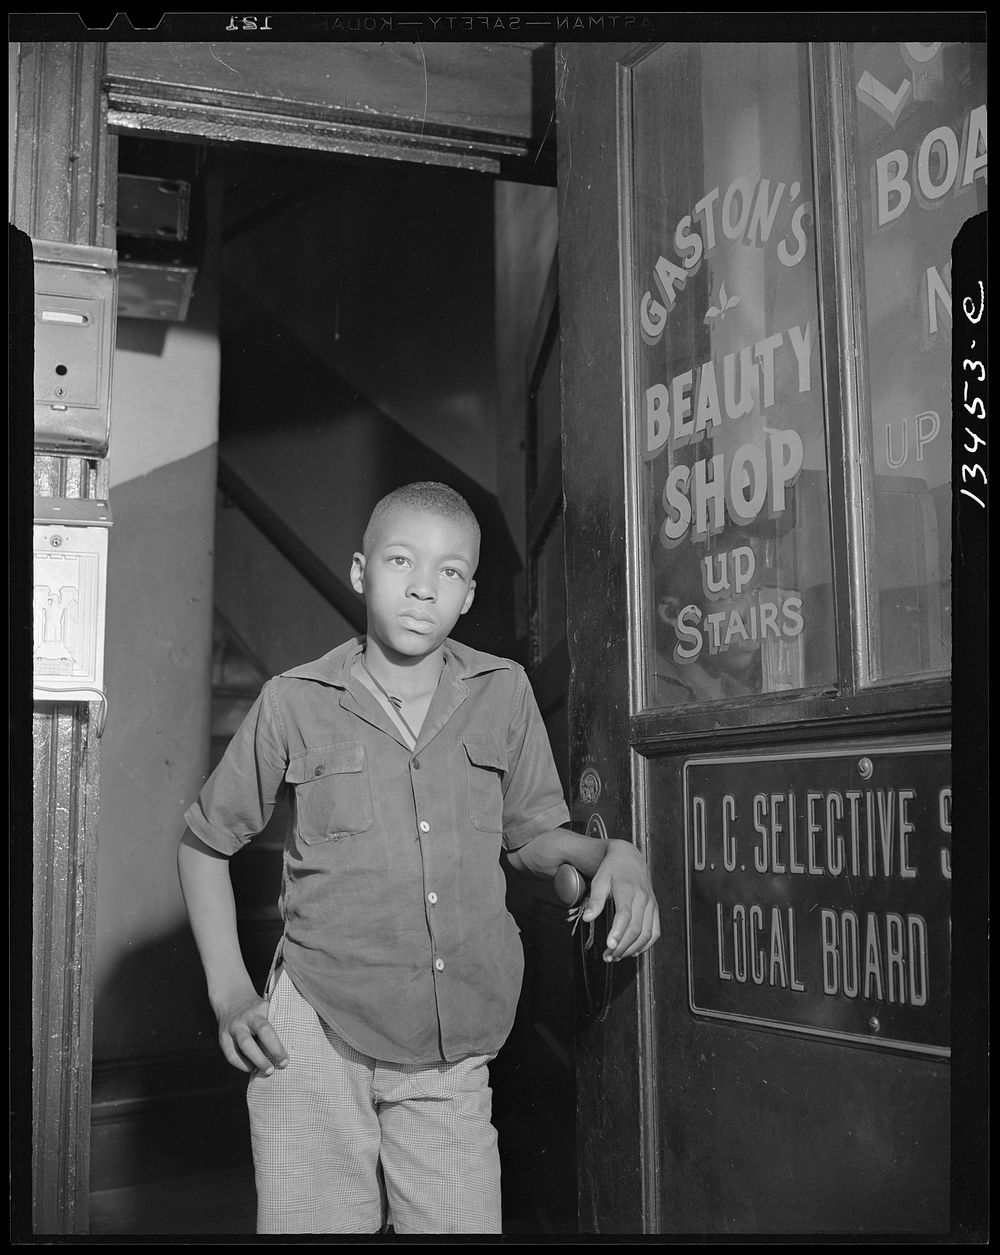 Washington, D.C. Youth waiting for a newspaper delivery truck. Sourced from the Library of Congress.